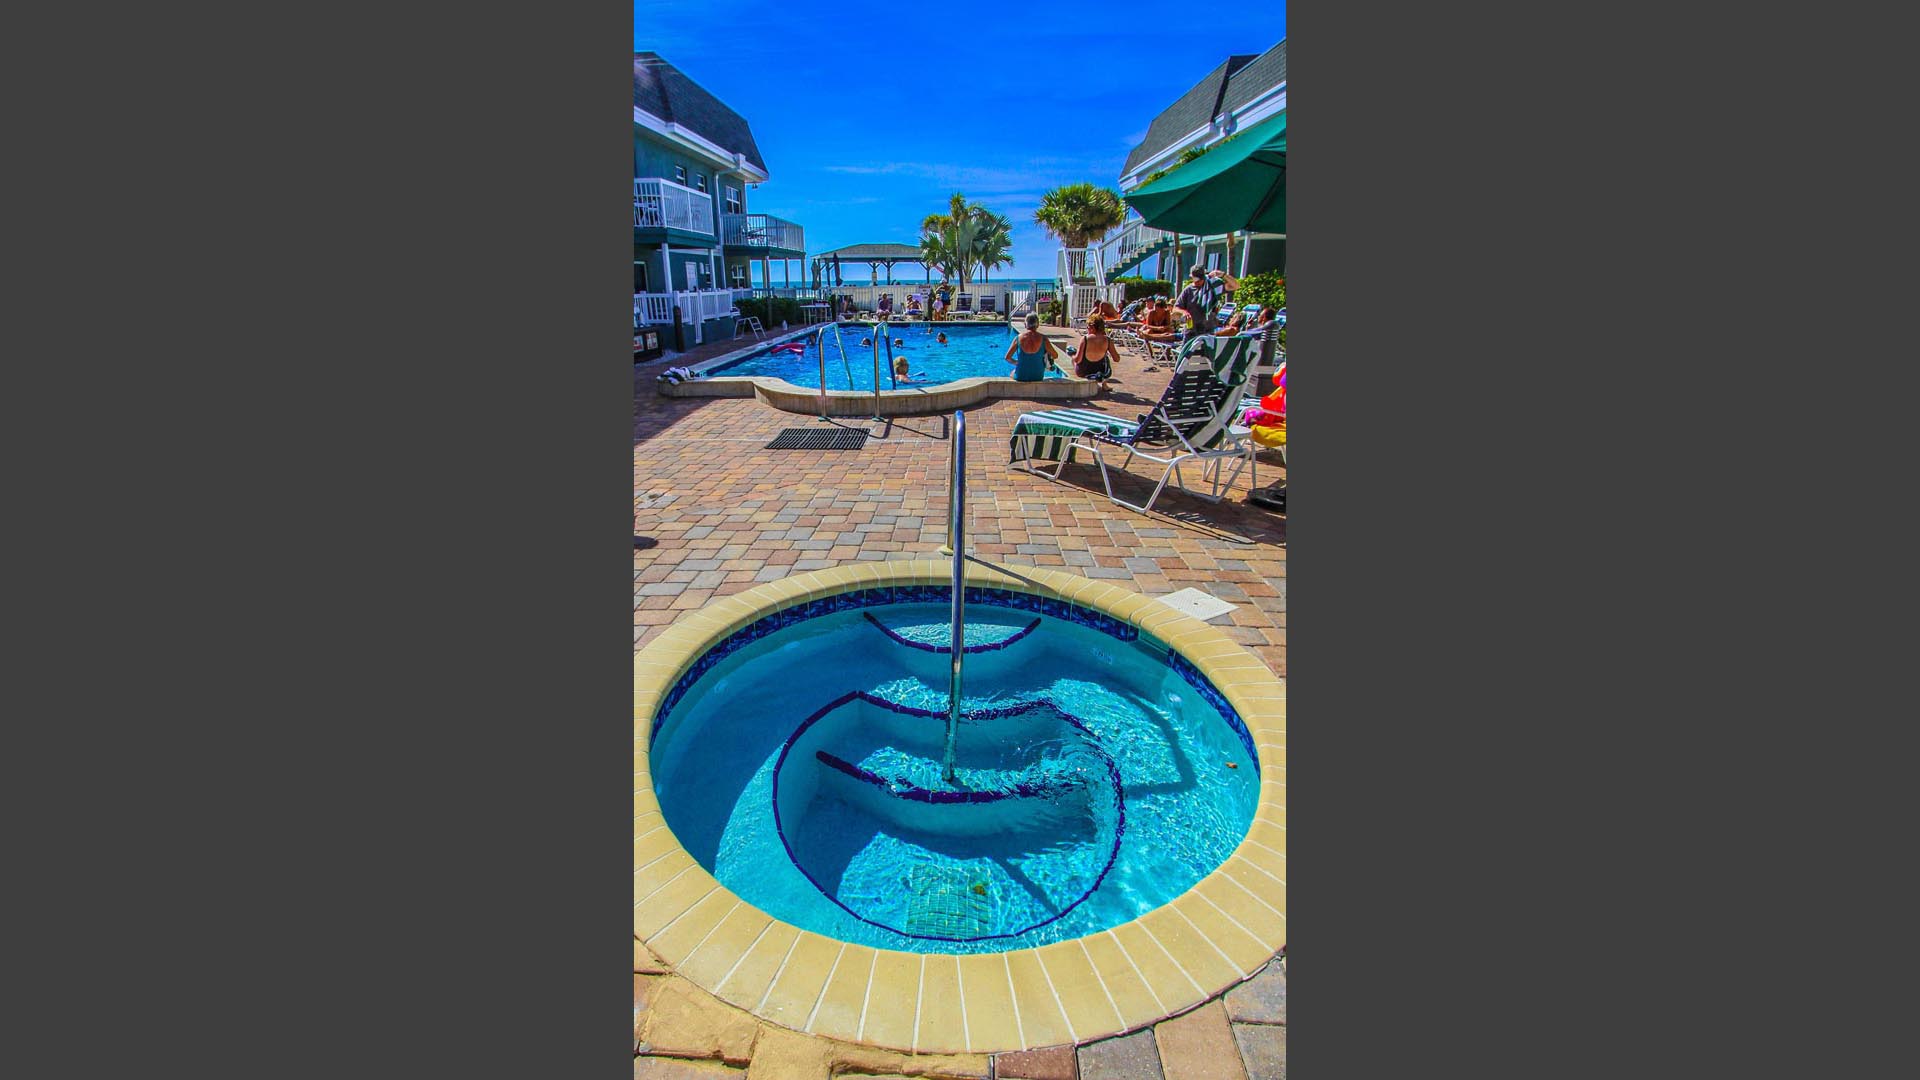 A refreshing view of the outdoor swimming pool and Jacuzzi  at VRI's Mariner Beach Club in St. Pete Beach, Florida.